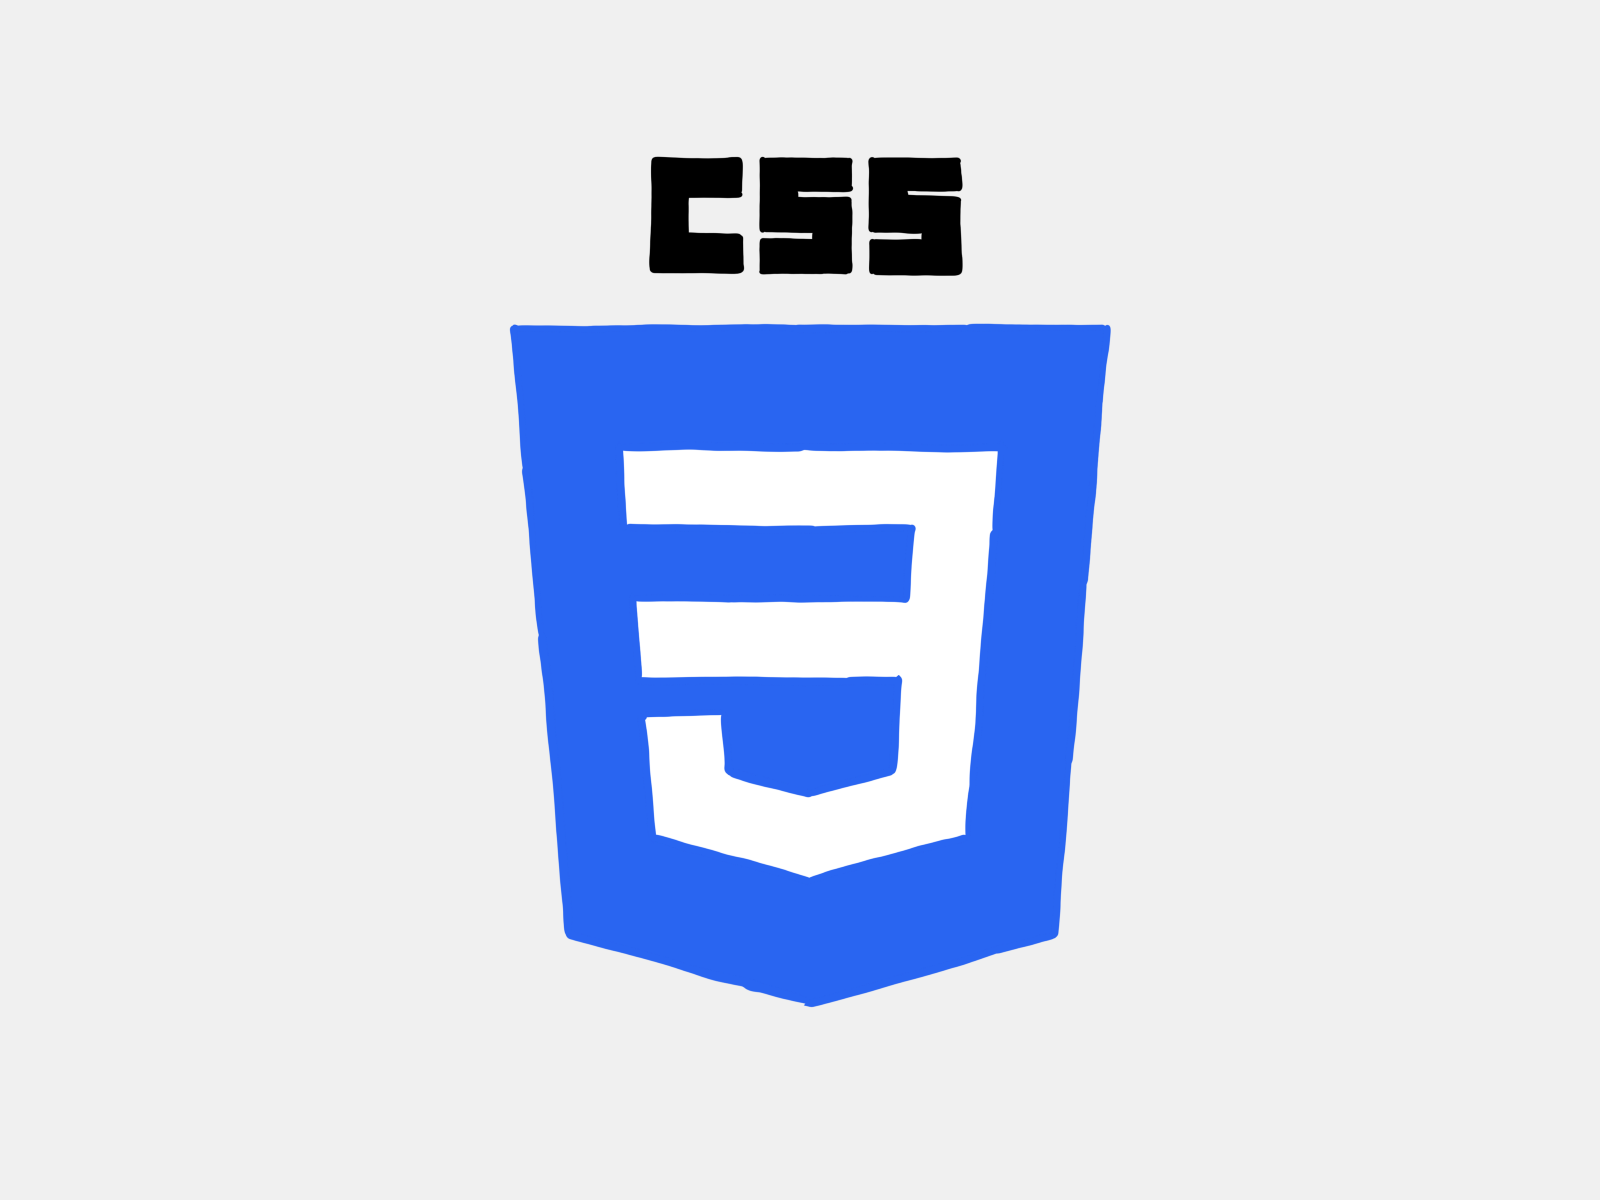 An illustration of the CSS3 logo.